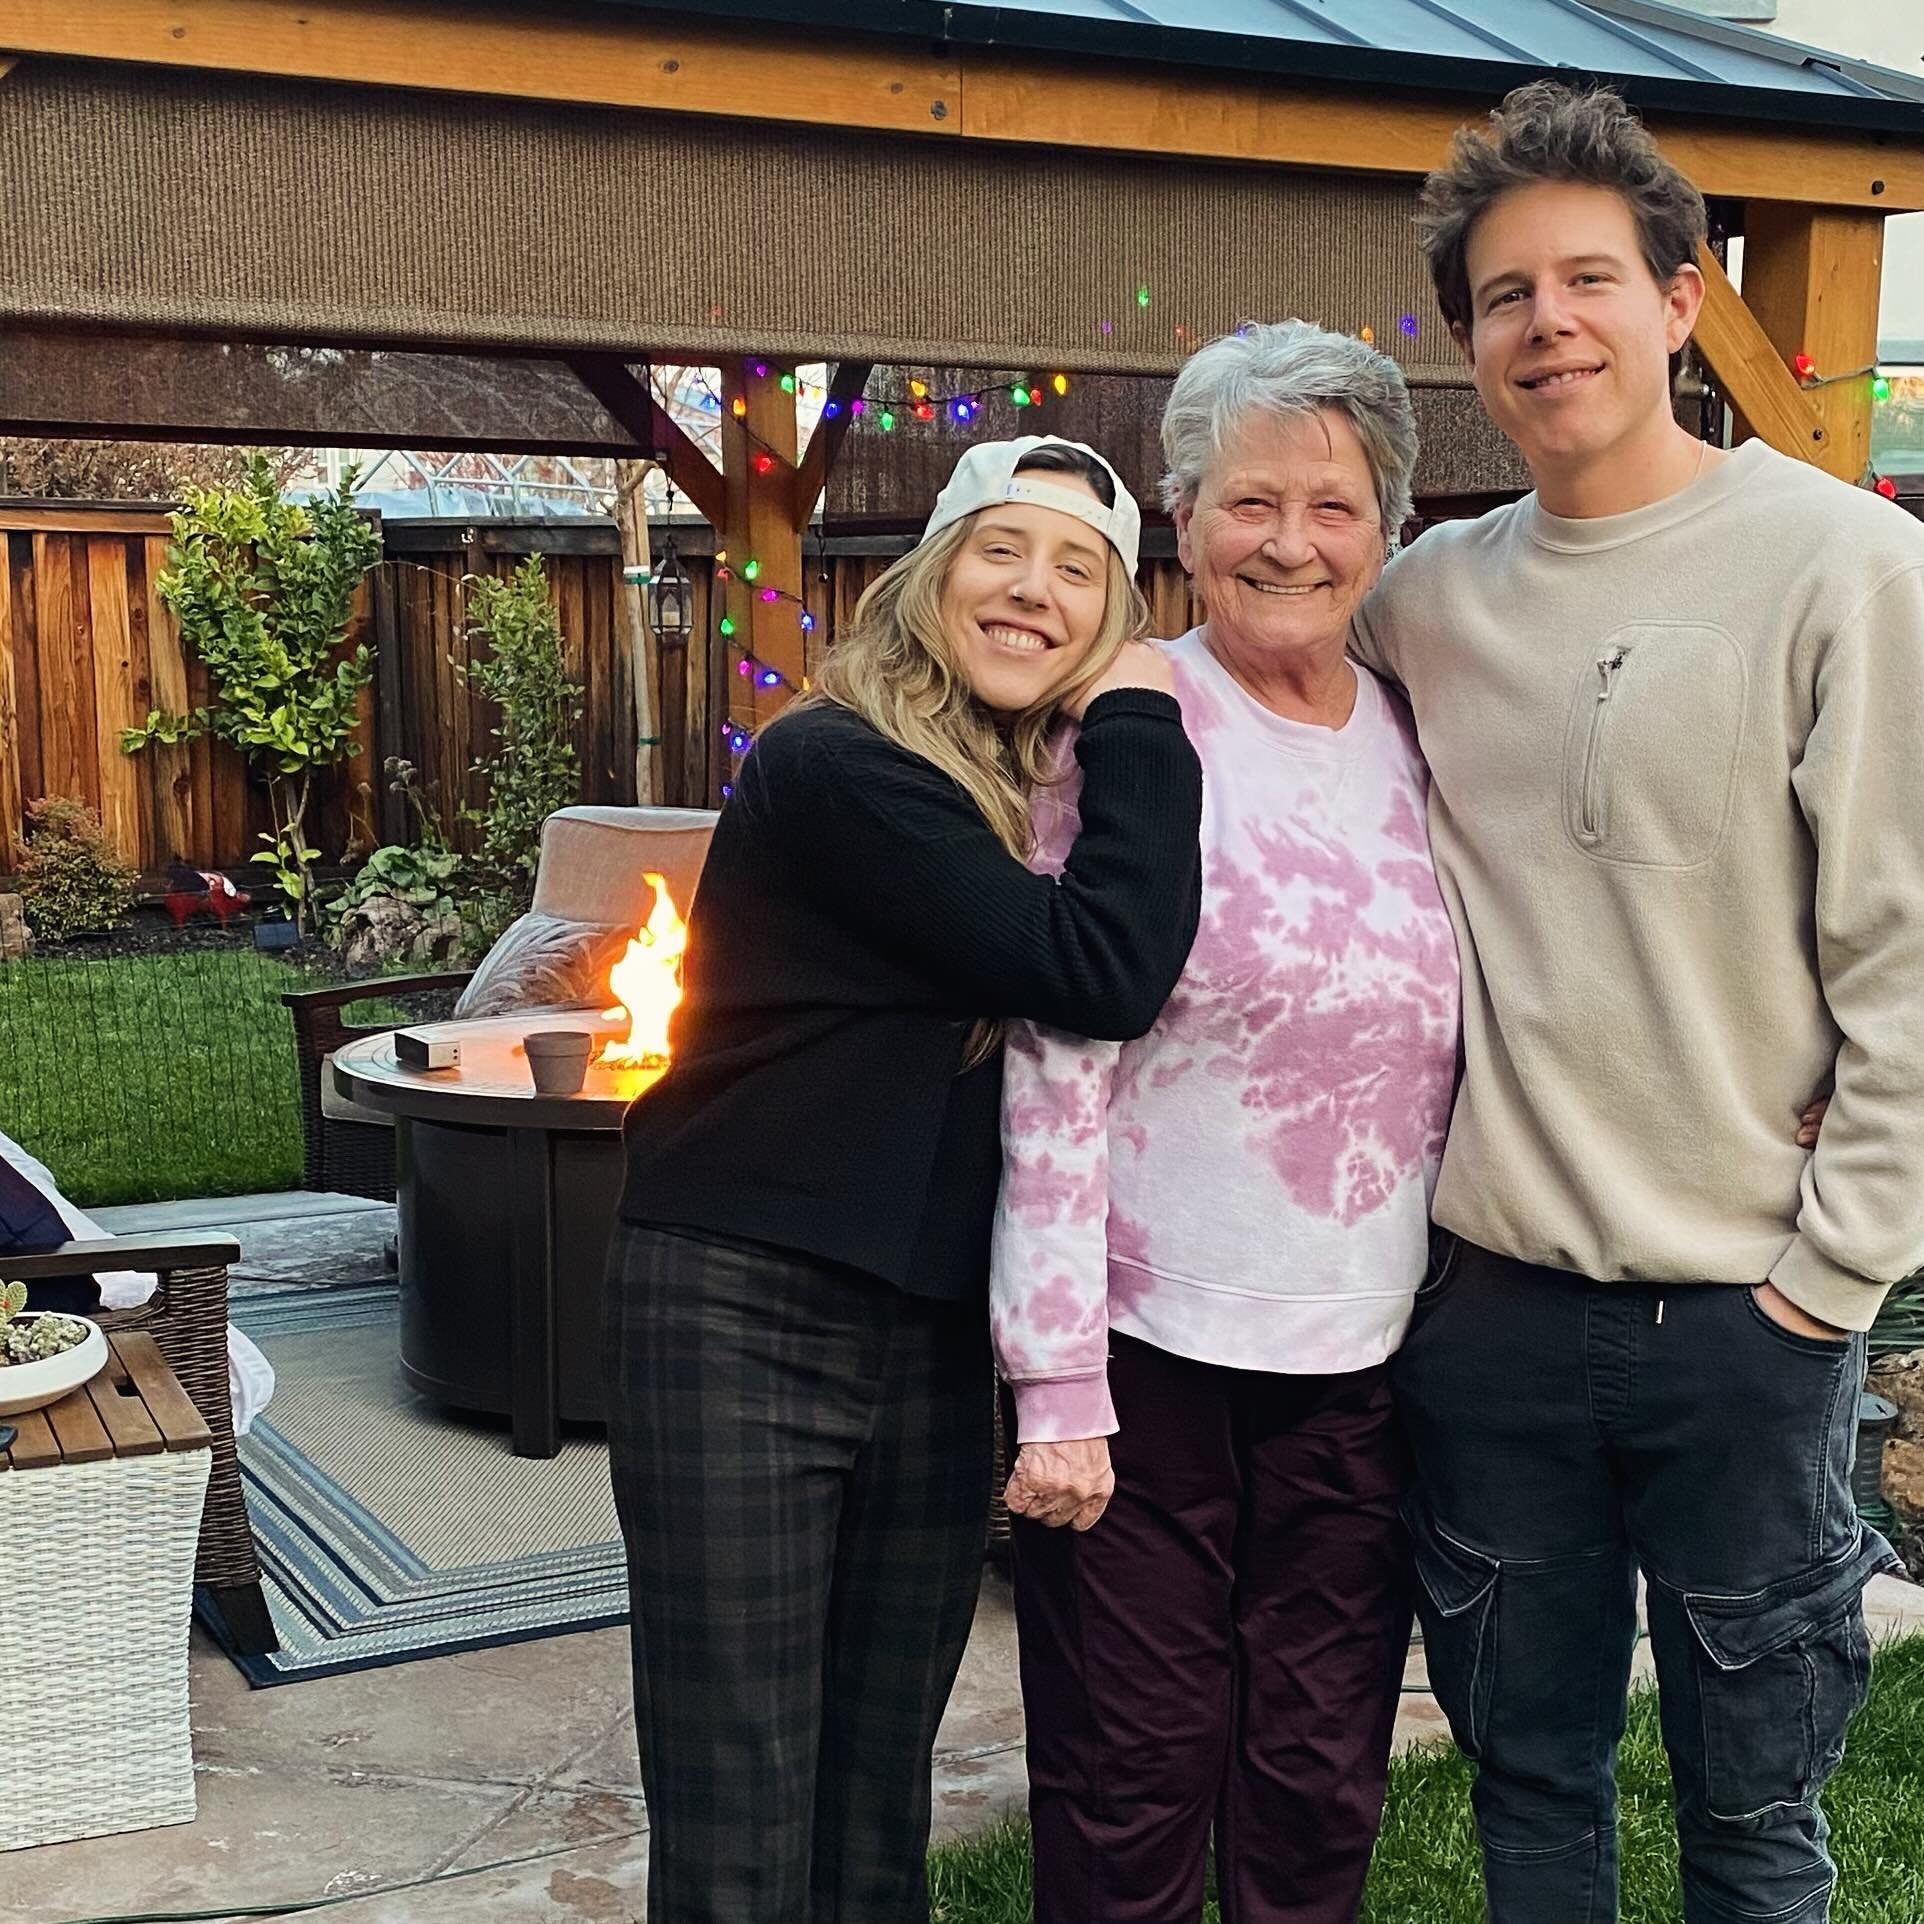 Seeing my mom (&ldquo;Moni&rdquo;) love my kids so well over the years has given me an even deeper appreciation for her. She&rsquo;s quick to laugh, generous, curious about every little thing going on in their lives. And, of course, she&rsquo;s been 